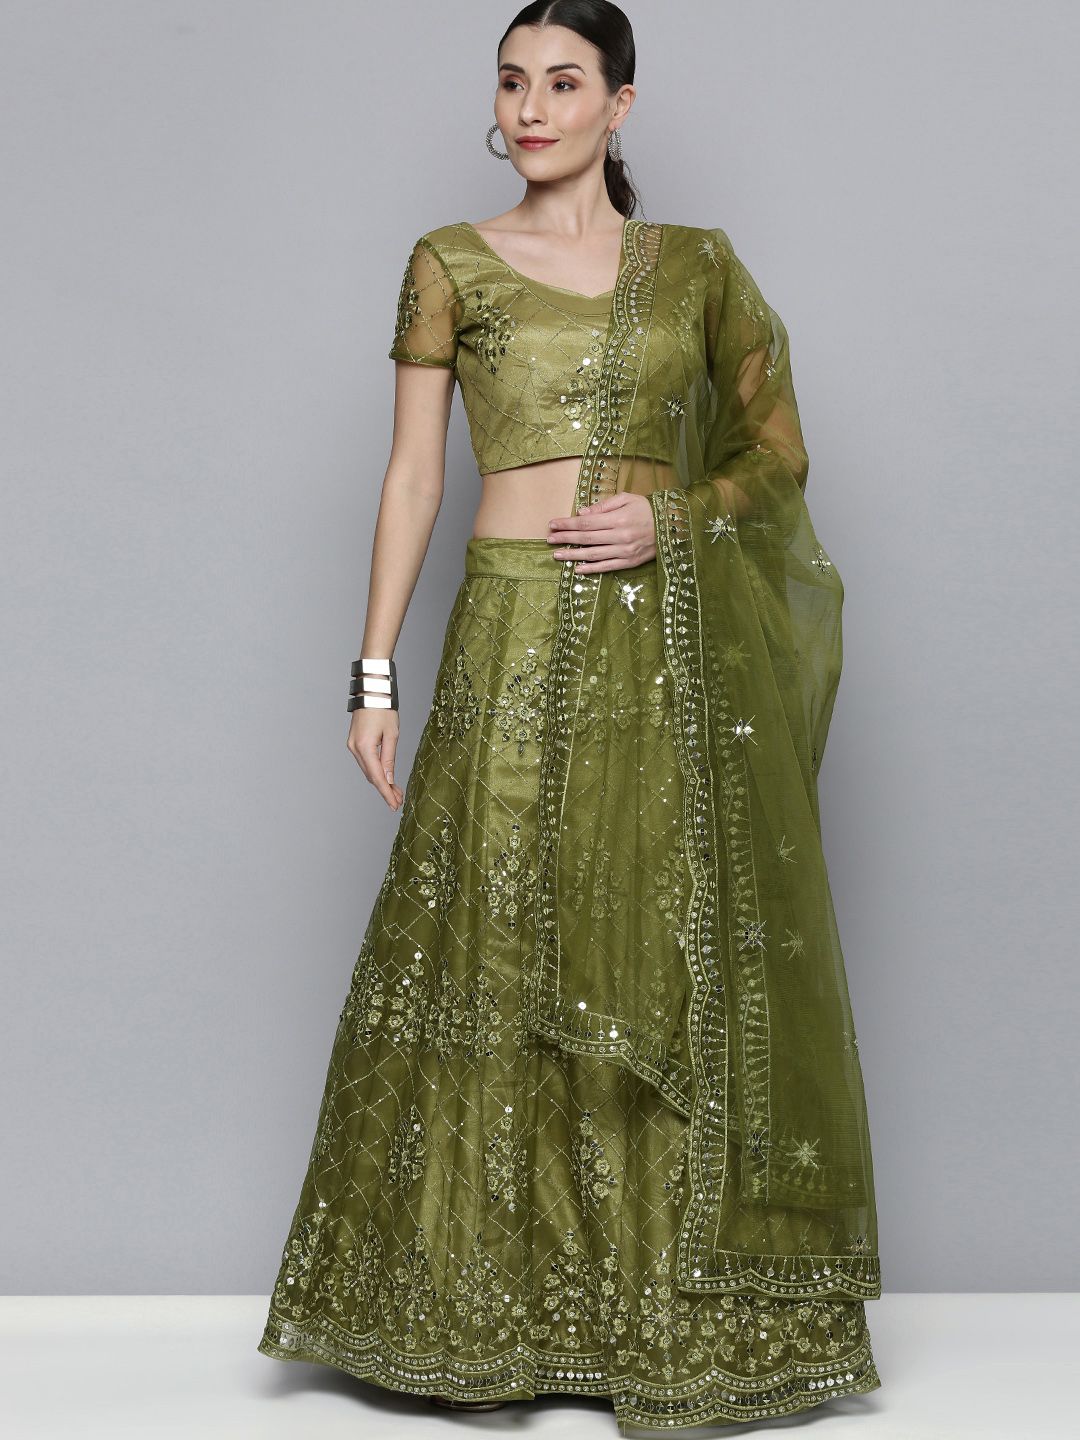 Kvsfab Olive Green Embroidered Semi-Stitched Lehenga with Unstitched Blouse & Dupatta Price in India